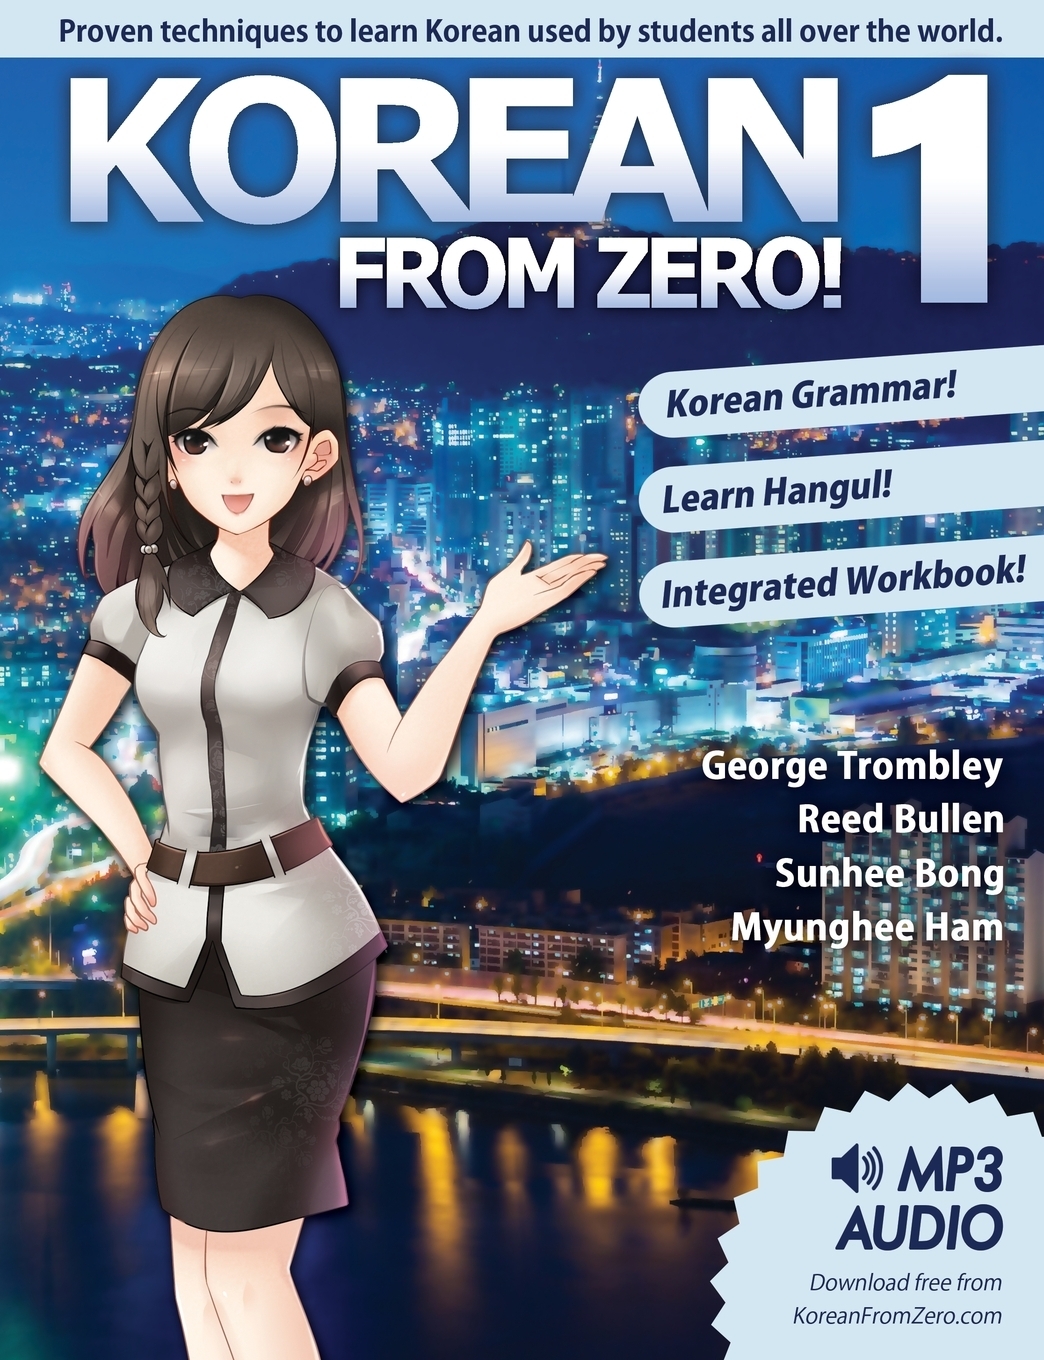 Korean From Zero! 1. Master the Korean Language and Hangul Writing System with Integrated Workbook and Online Course